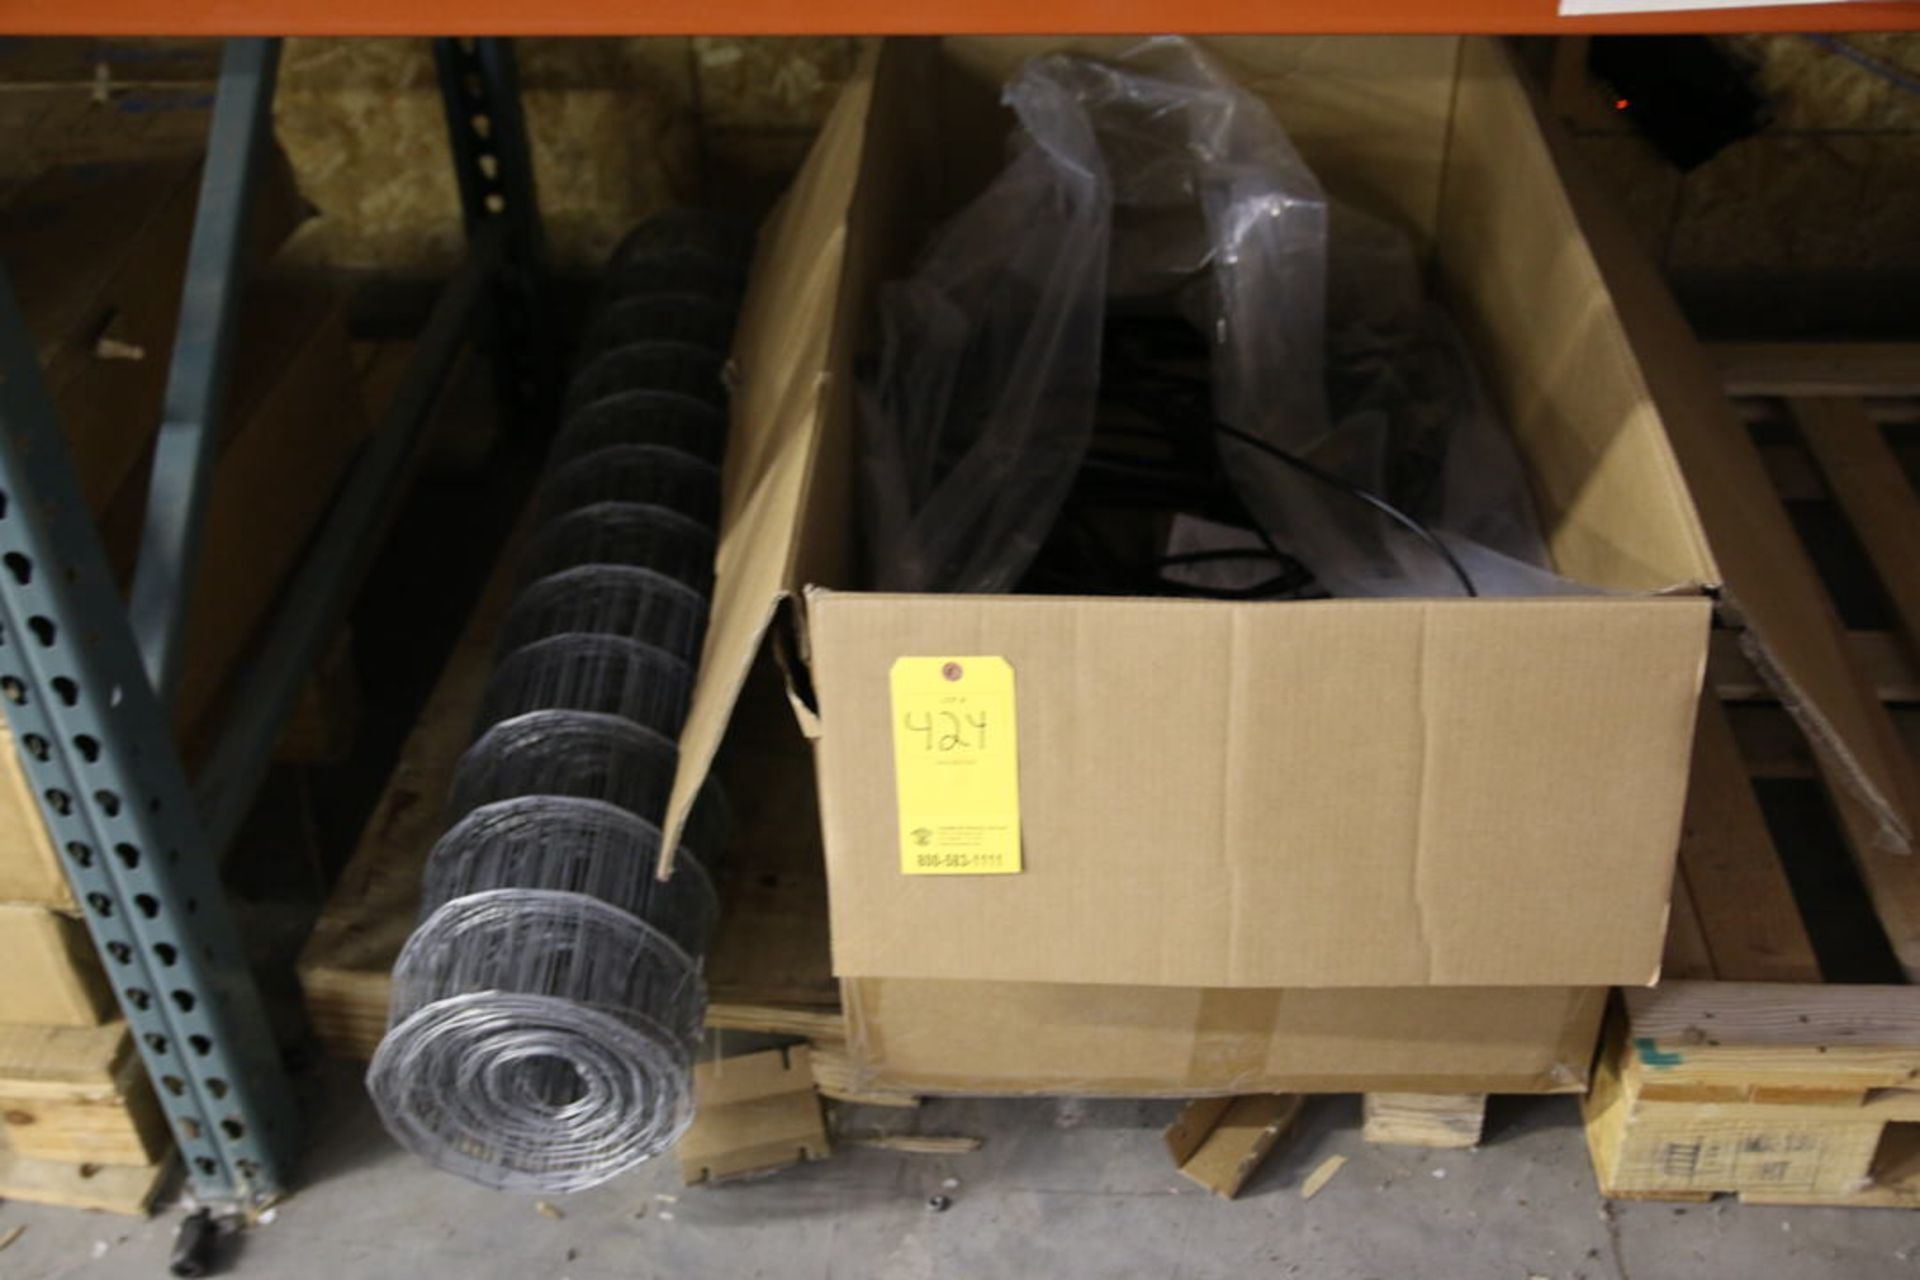 Pallet of Enphase Q Cables and Roll of Wire Mesh